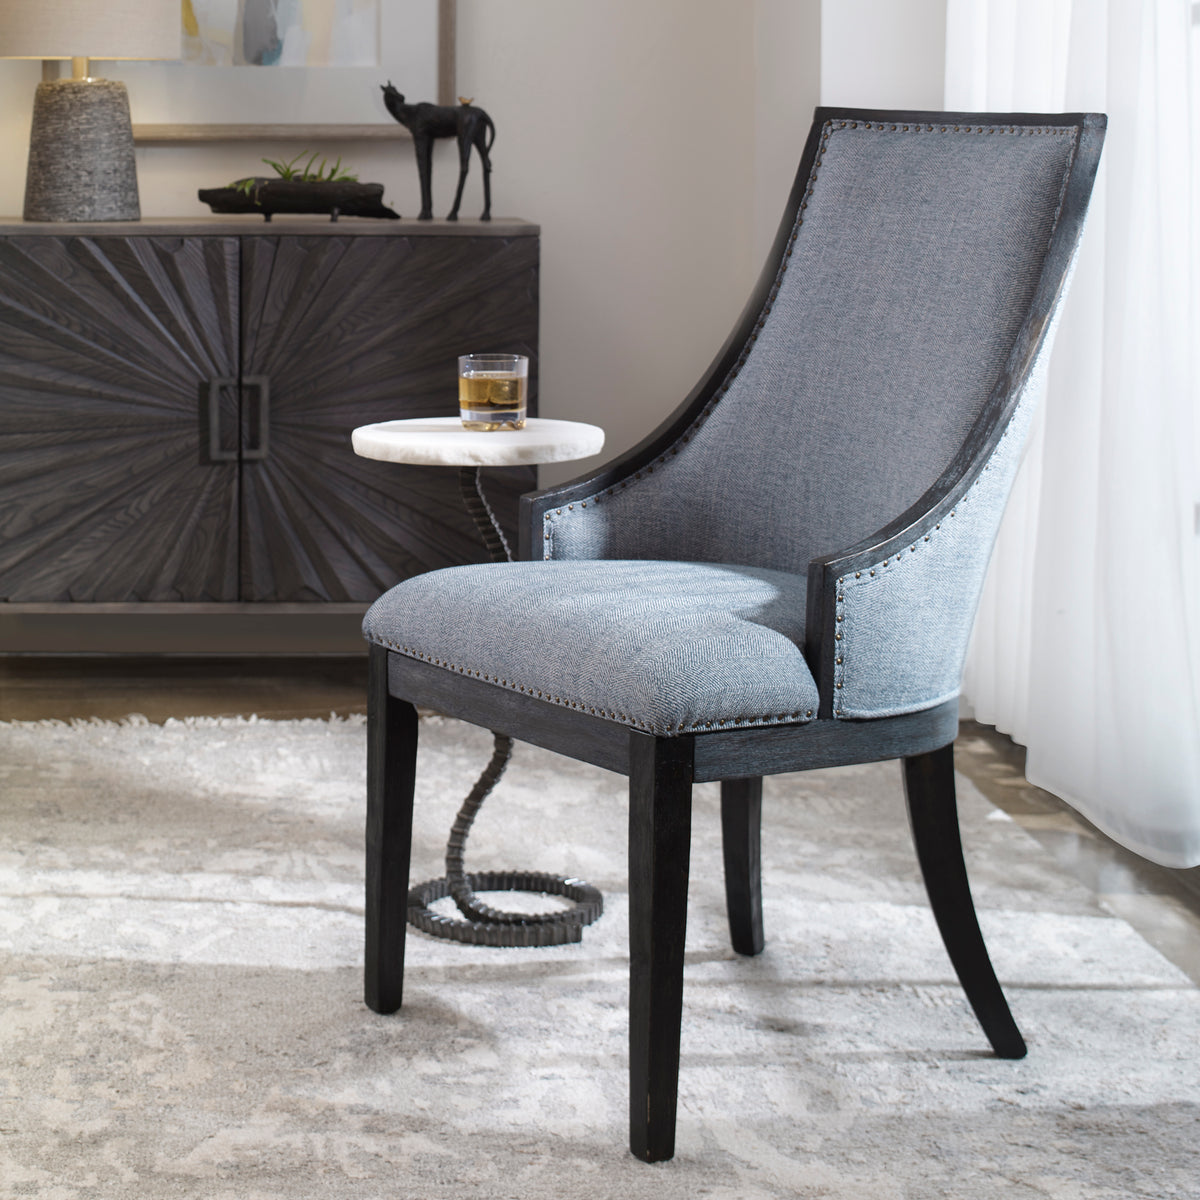 Uttermost Janis Ebony Accent Chair